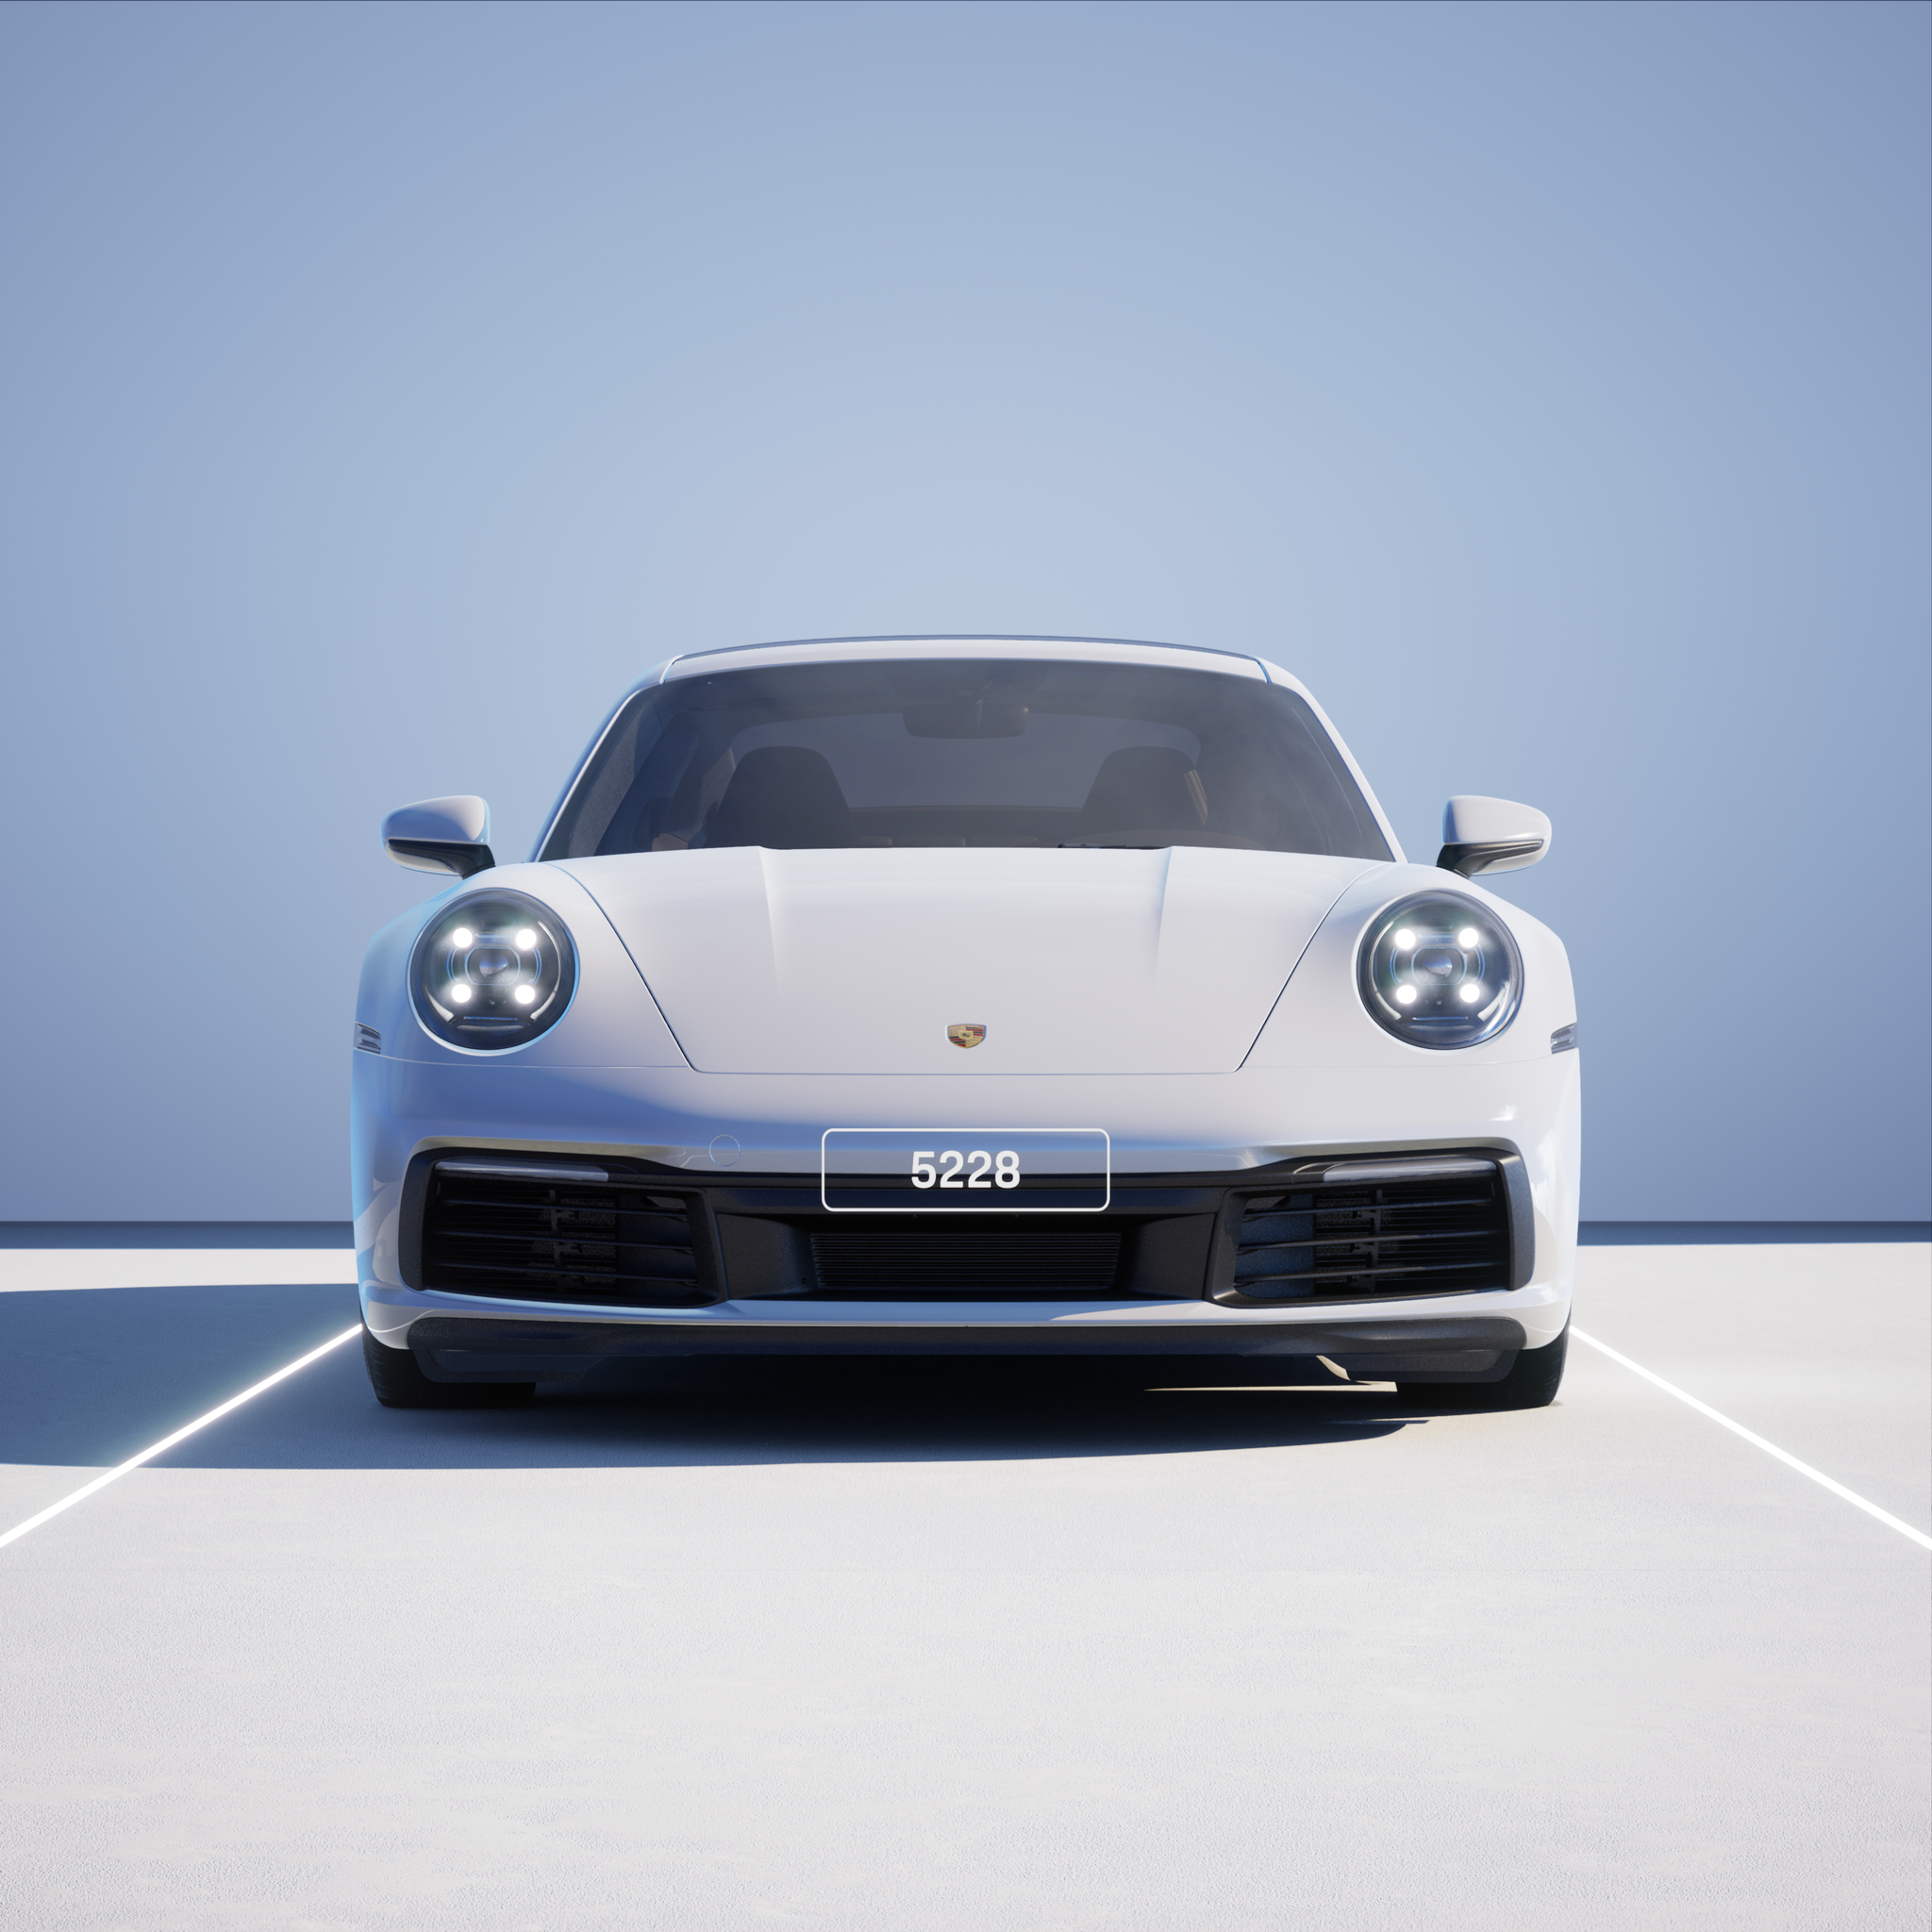 The PORSCHΞ 911 5228 image in phase